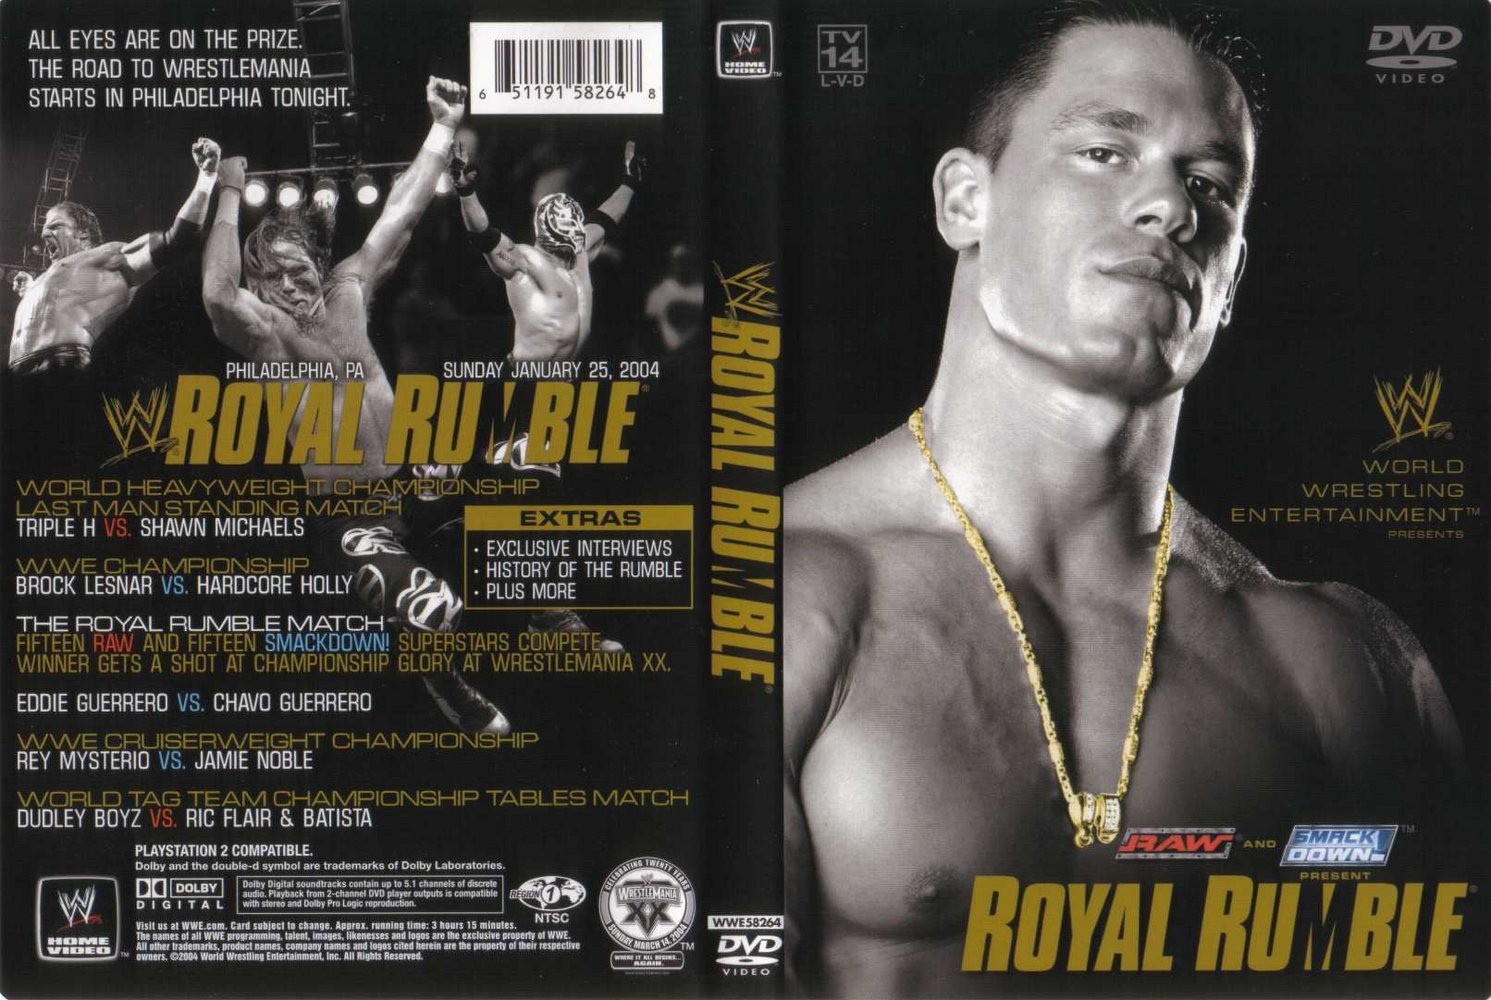 Jaquette DVD WWE Royal Rumble 2004